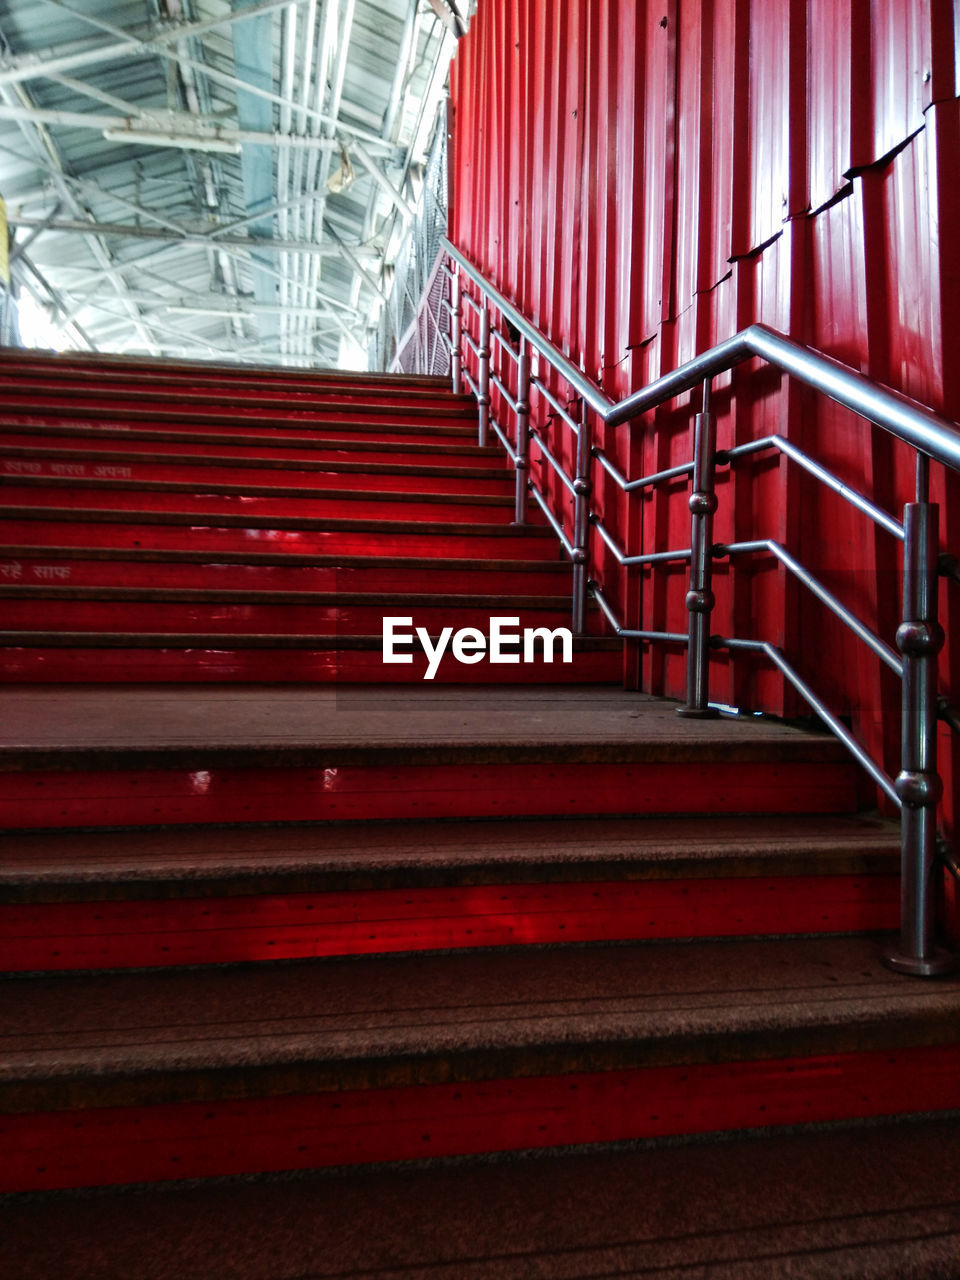 Red Spiral Staircase Steps And Staircases Steps Staircase Railing Architecture The Still Life Photographer - 2018 EyeEm Awards The Traveler - 2018 EyeEm Awards The Street Photographer - 2018 EyeEm Awards A New Perspective On Life The Art Of Street Photography